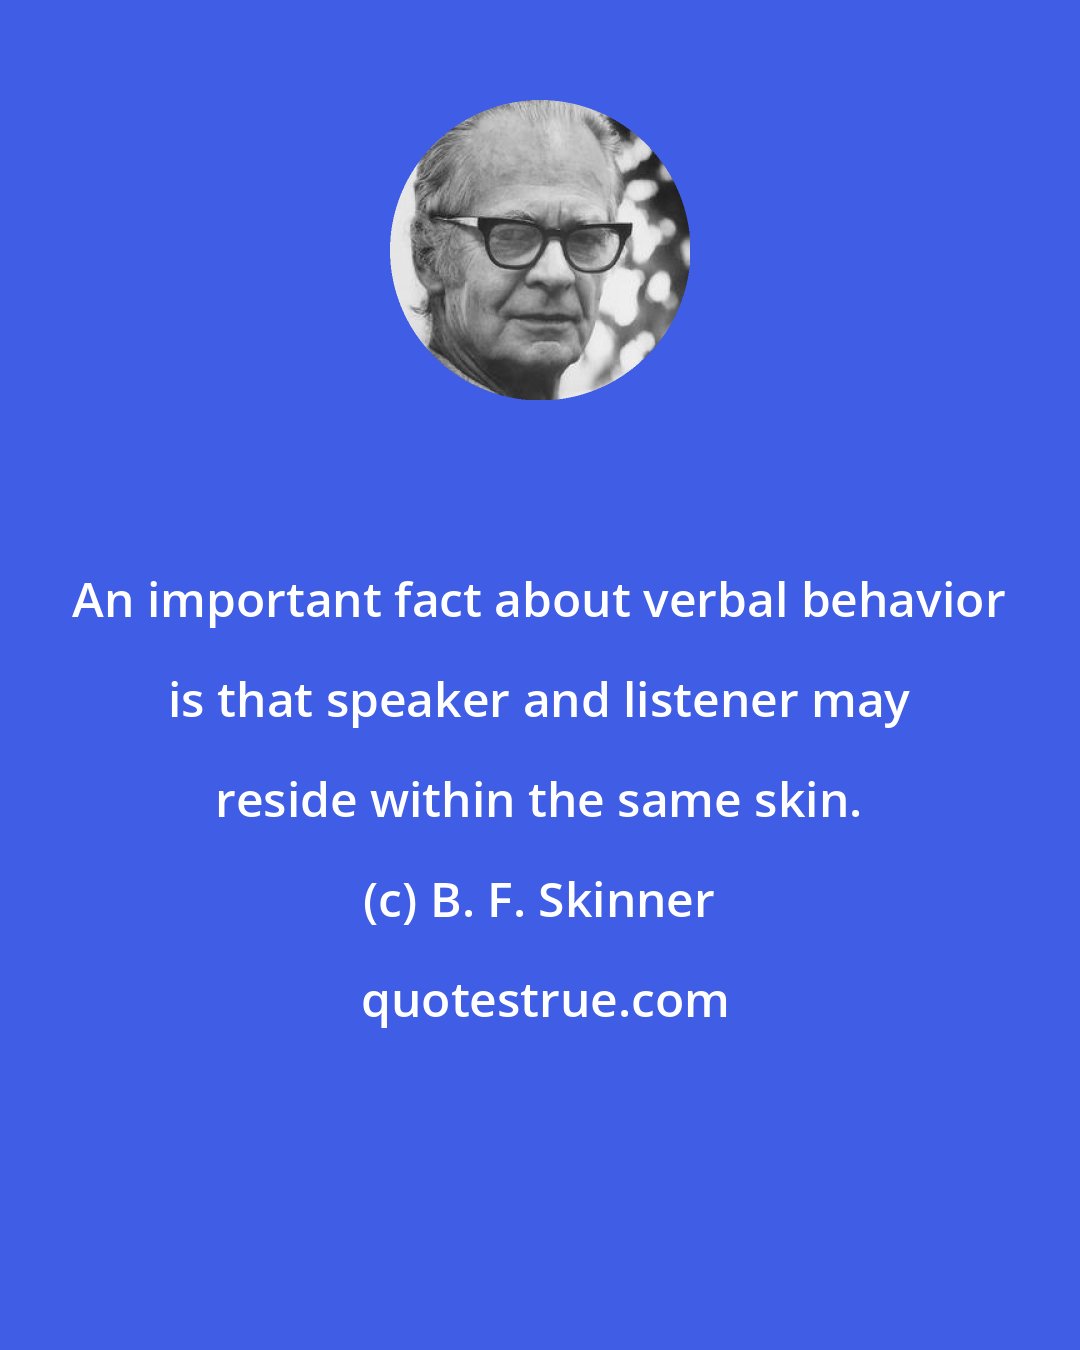 B. F. Skinner: An important fact about verbal behavior is that speaker and listener may reside within the same skin.